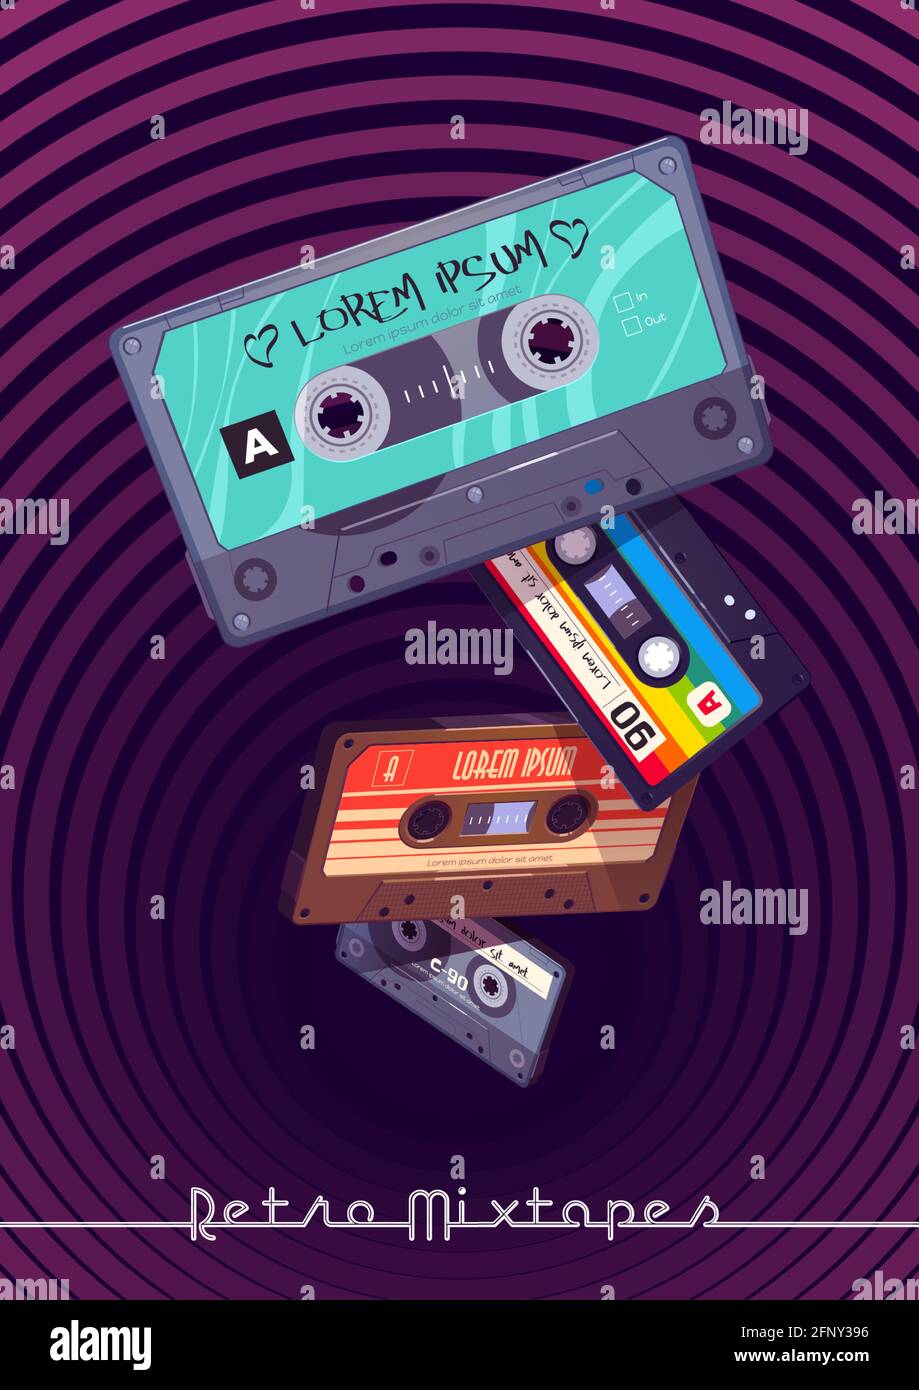 Retro mixtapes cartoon poster with audio mix tapes falling into deep hole with hypnotic pattern. Cassettes, media or music store ad in vintage style, analog multimedia devices, Vector illustration Stock Vector